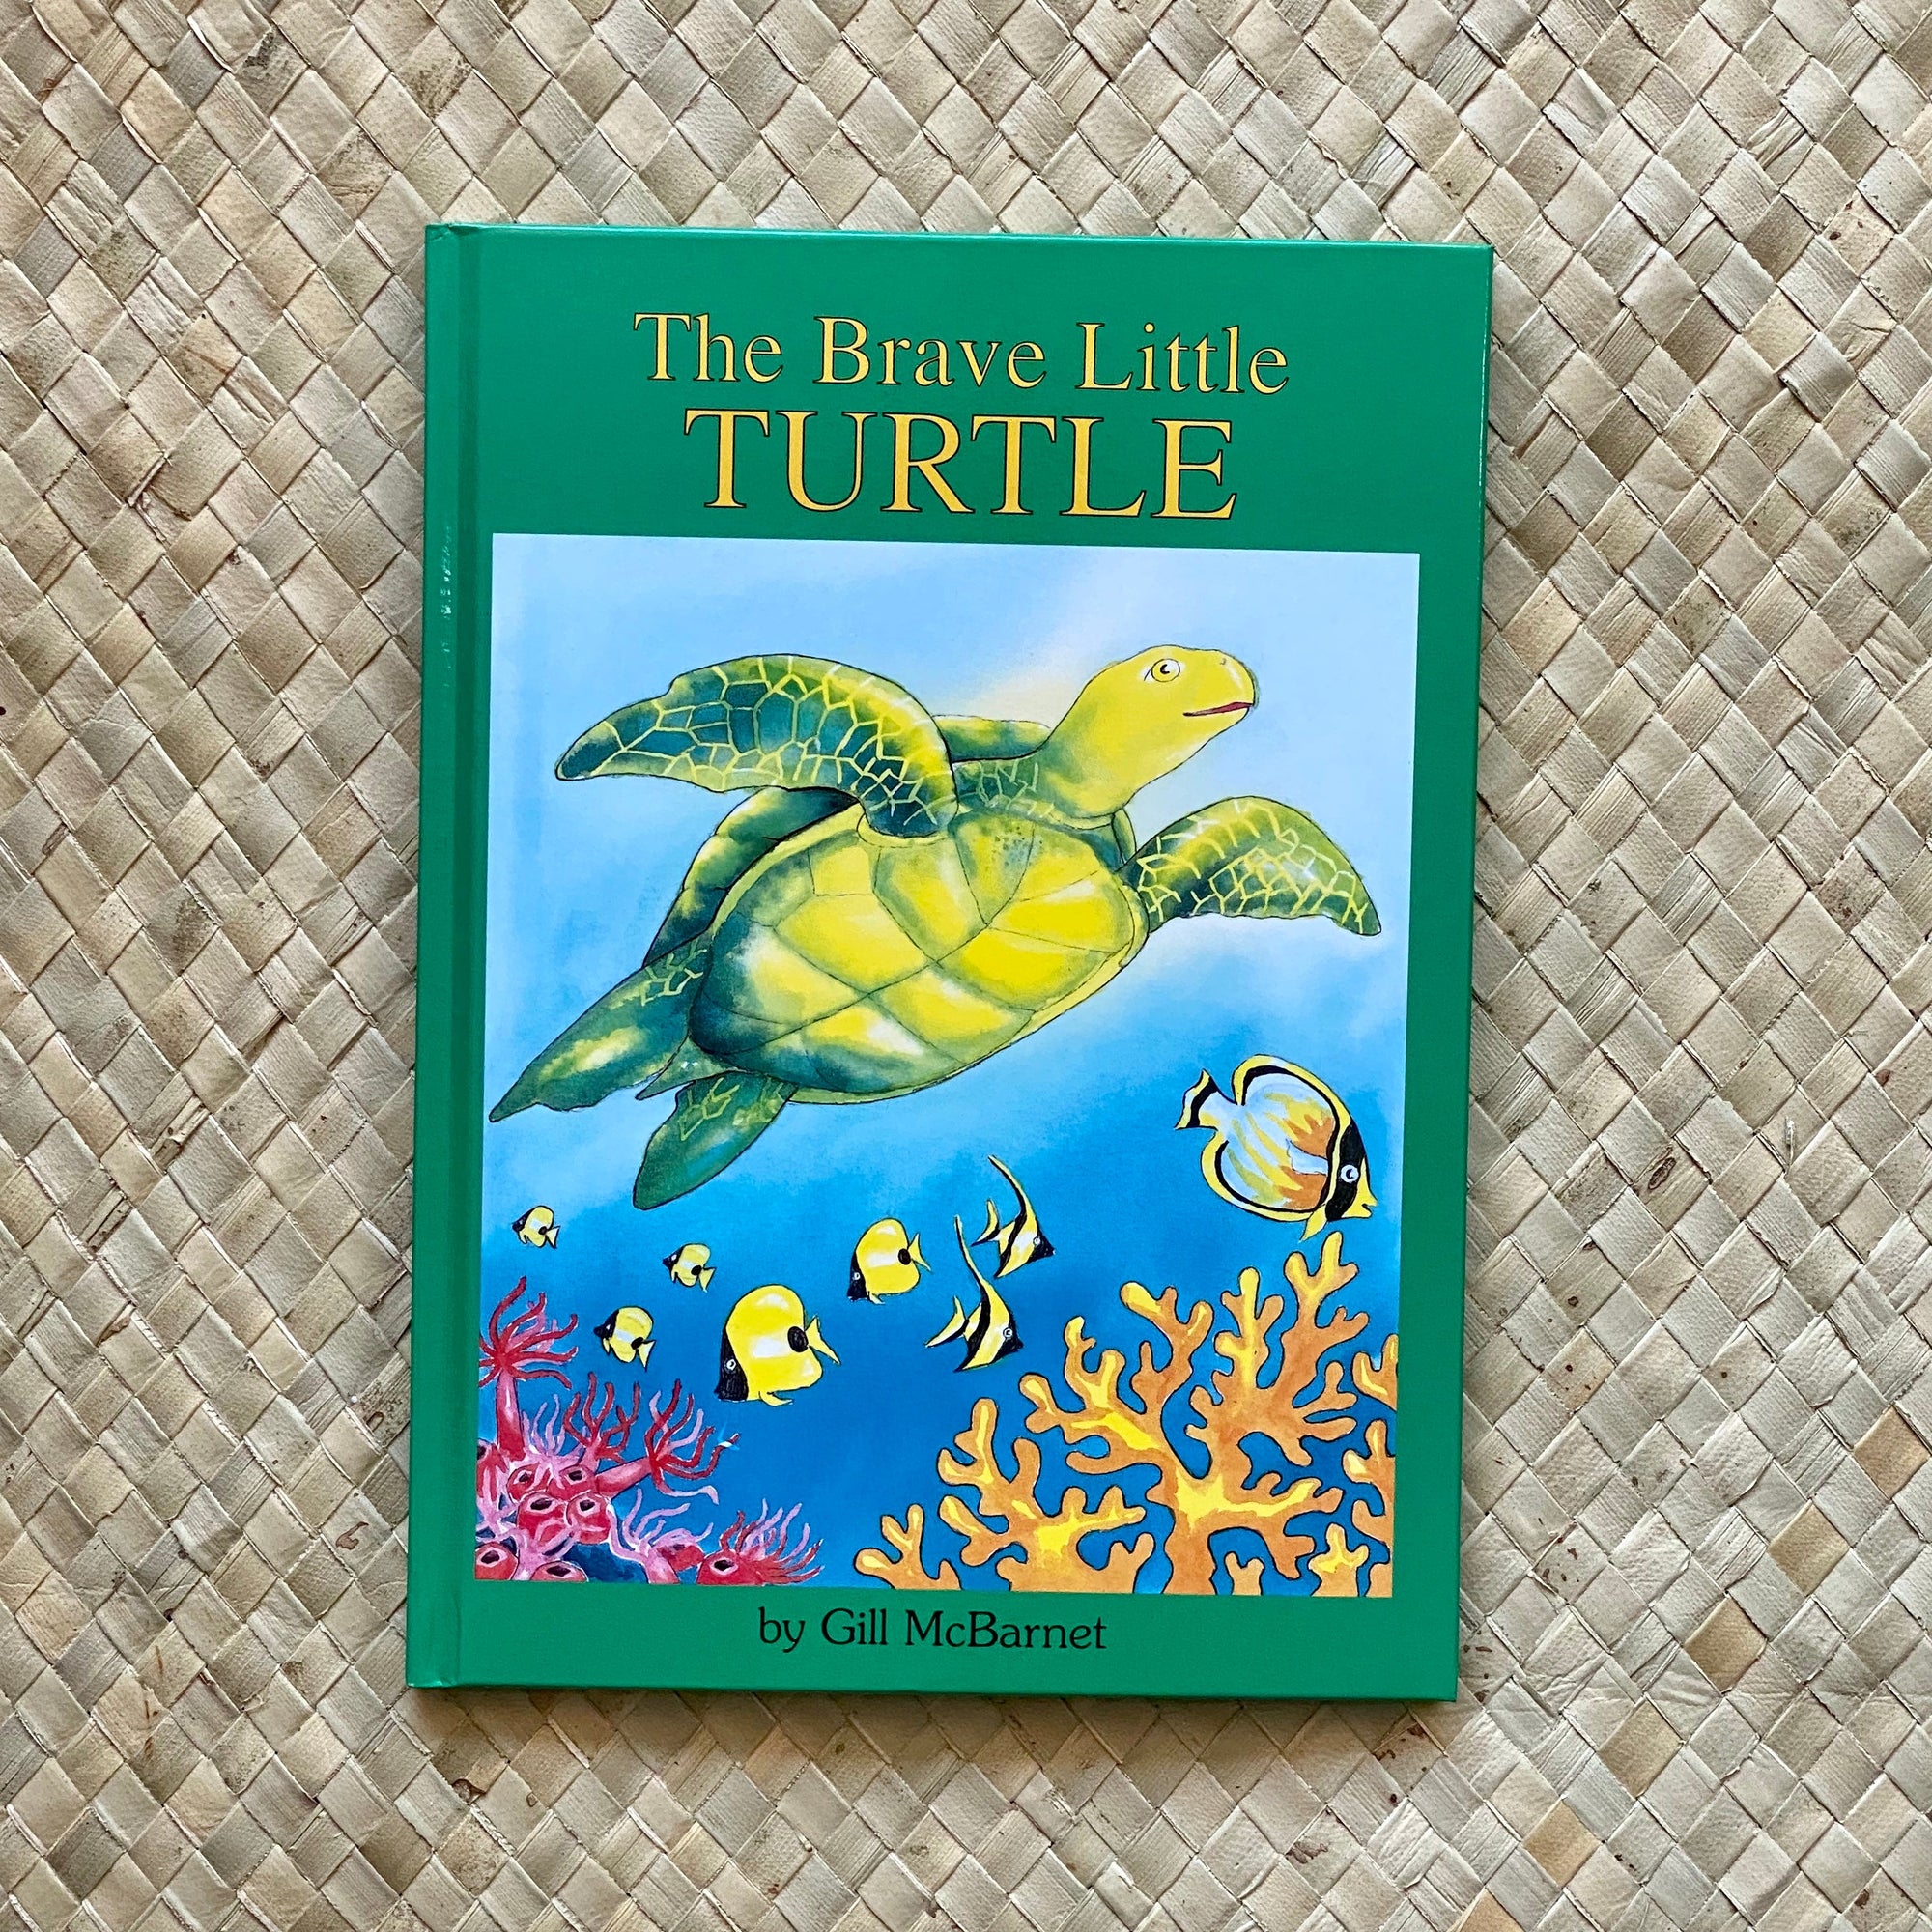 [SOLD OUT] Imperfect - The Brave Little Turtle